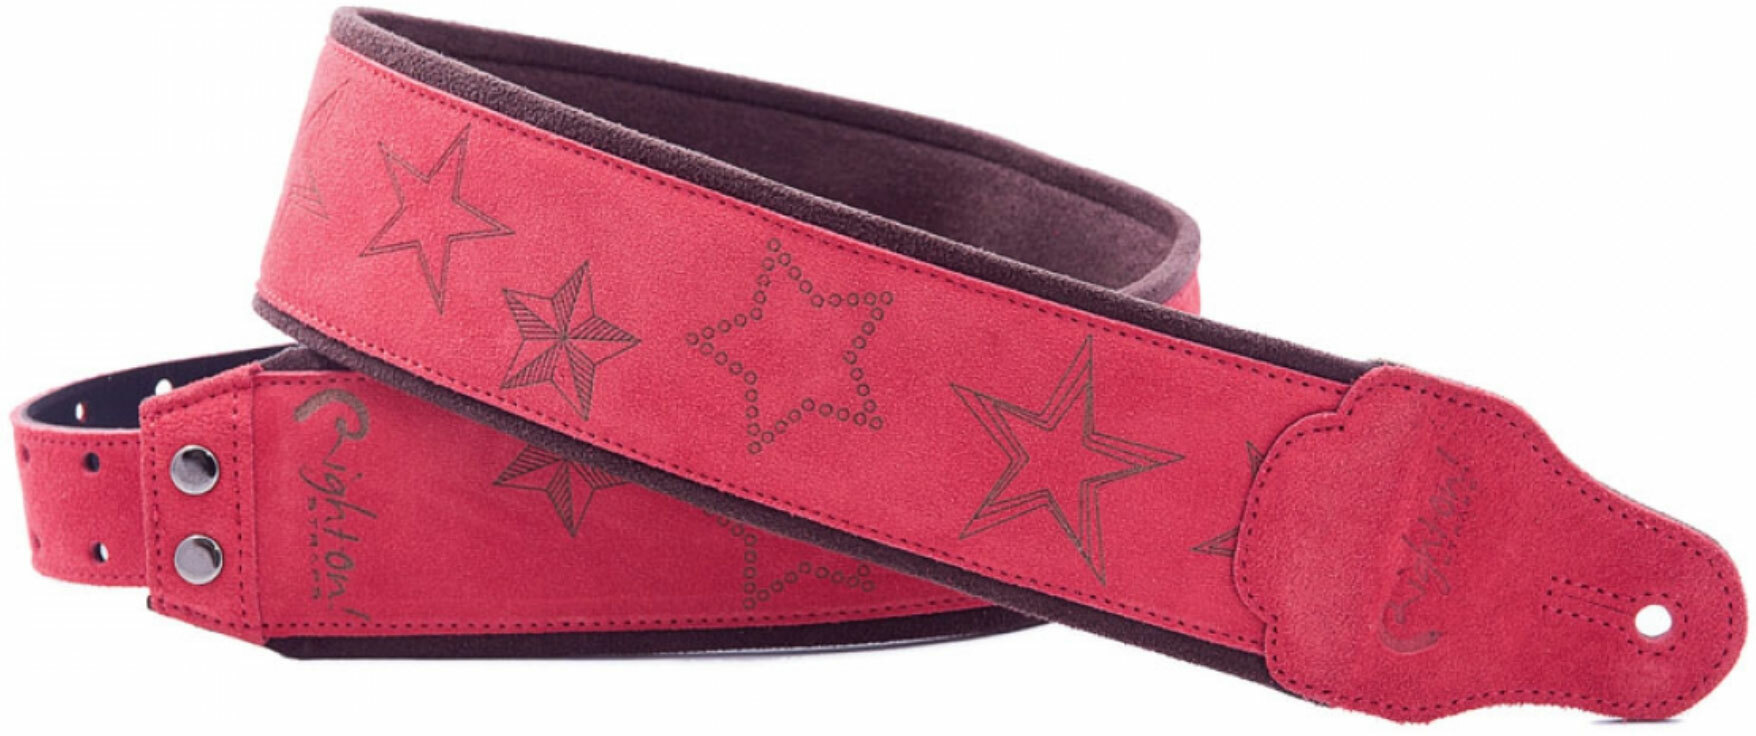 Righton Straps Jazz Stars Leather Guitar Strap Cuir 2.75inc Red - Guitar strap - Main picture